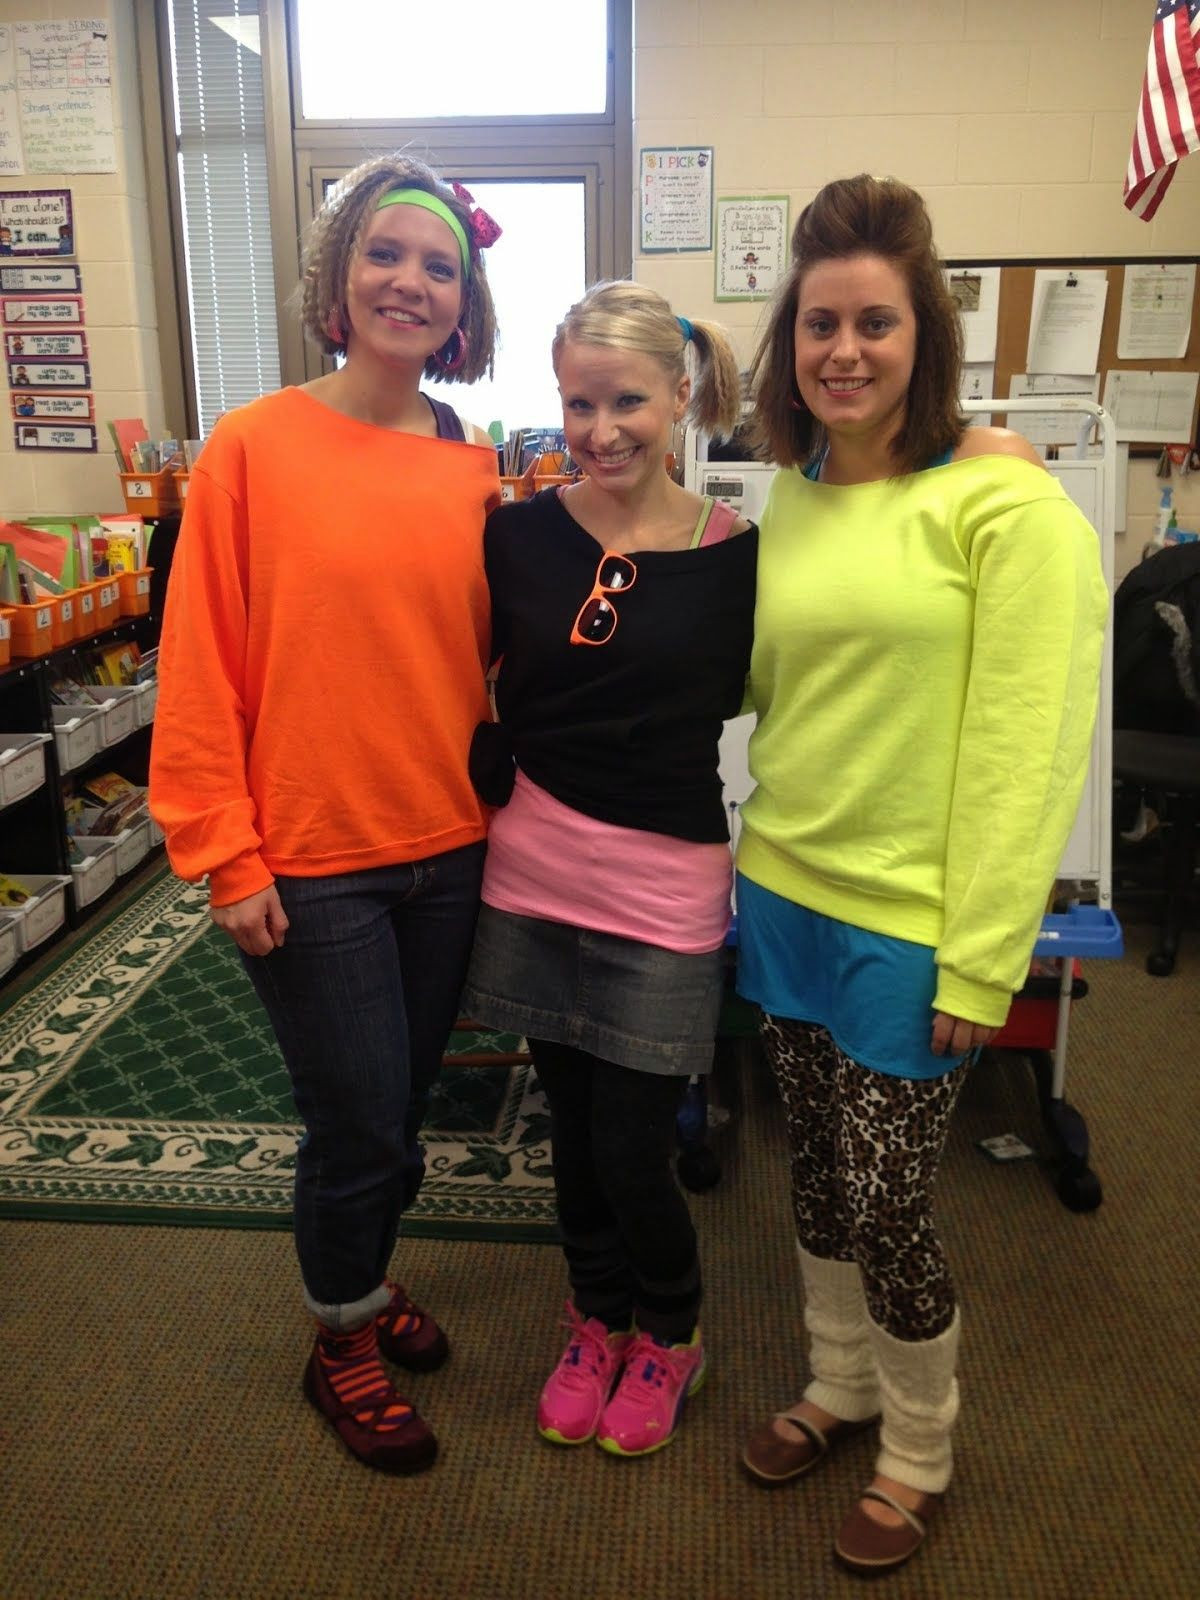 80S Dress Up Ideas For Kids
 80 s dress up day at school Google Search